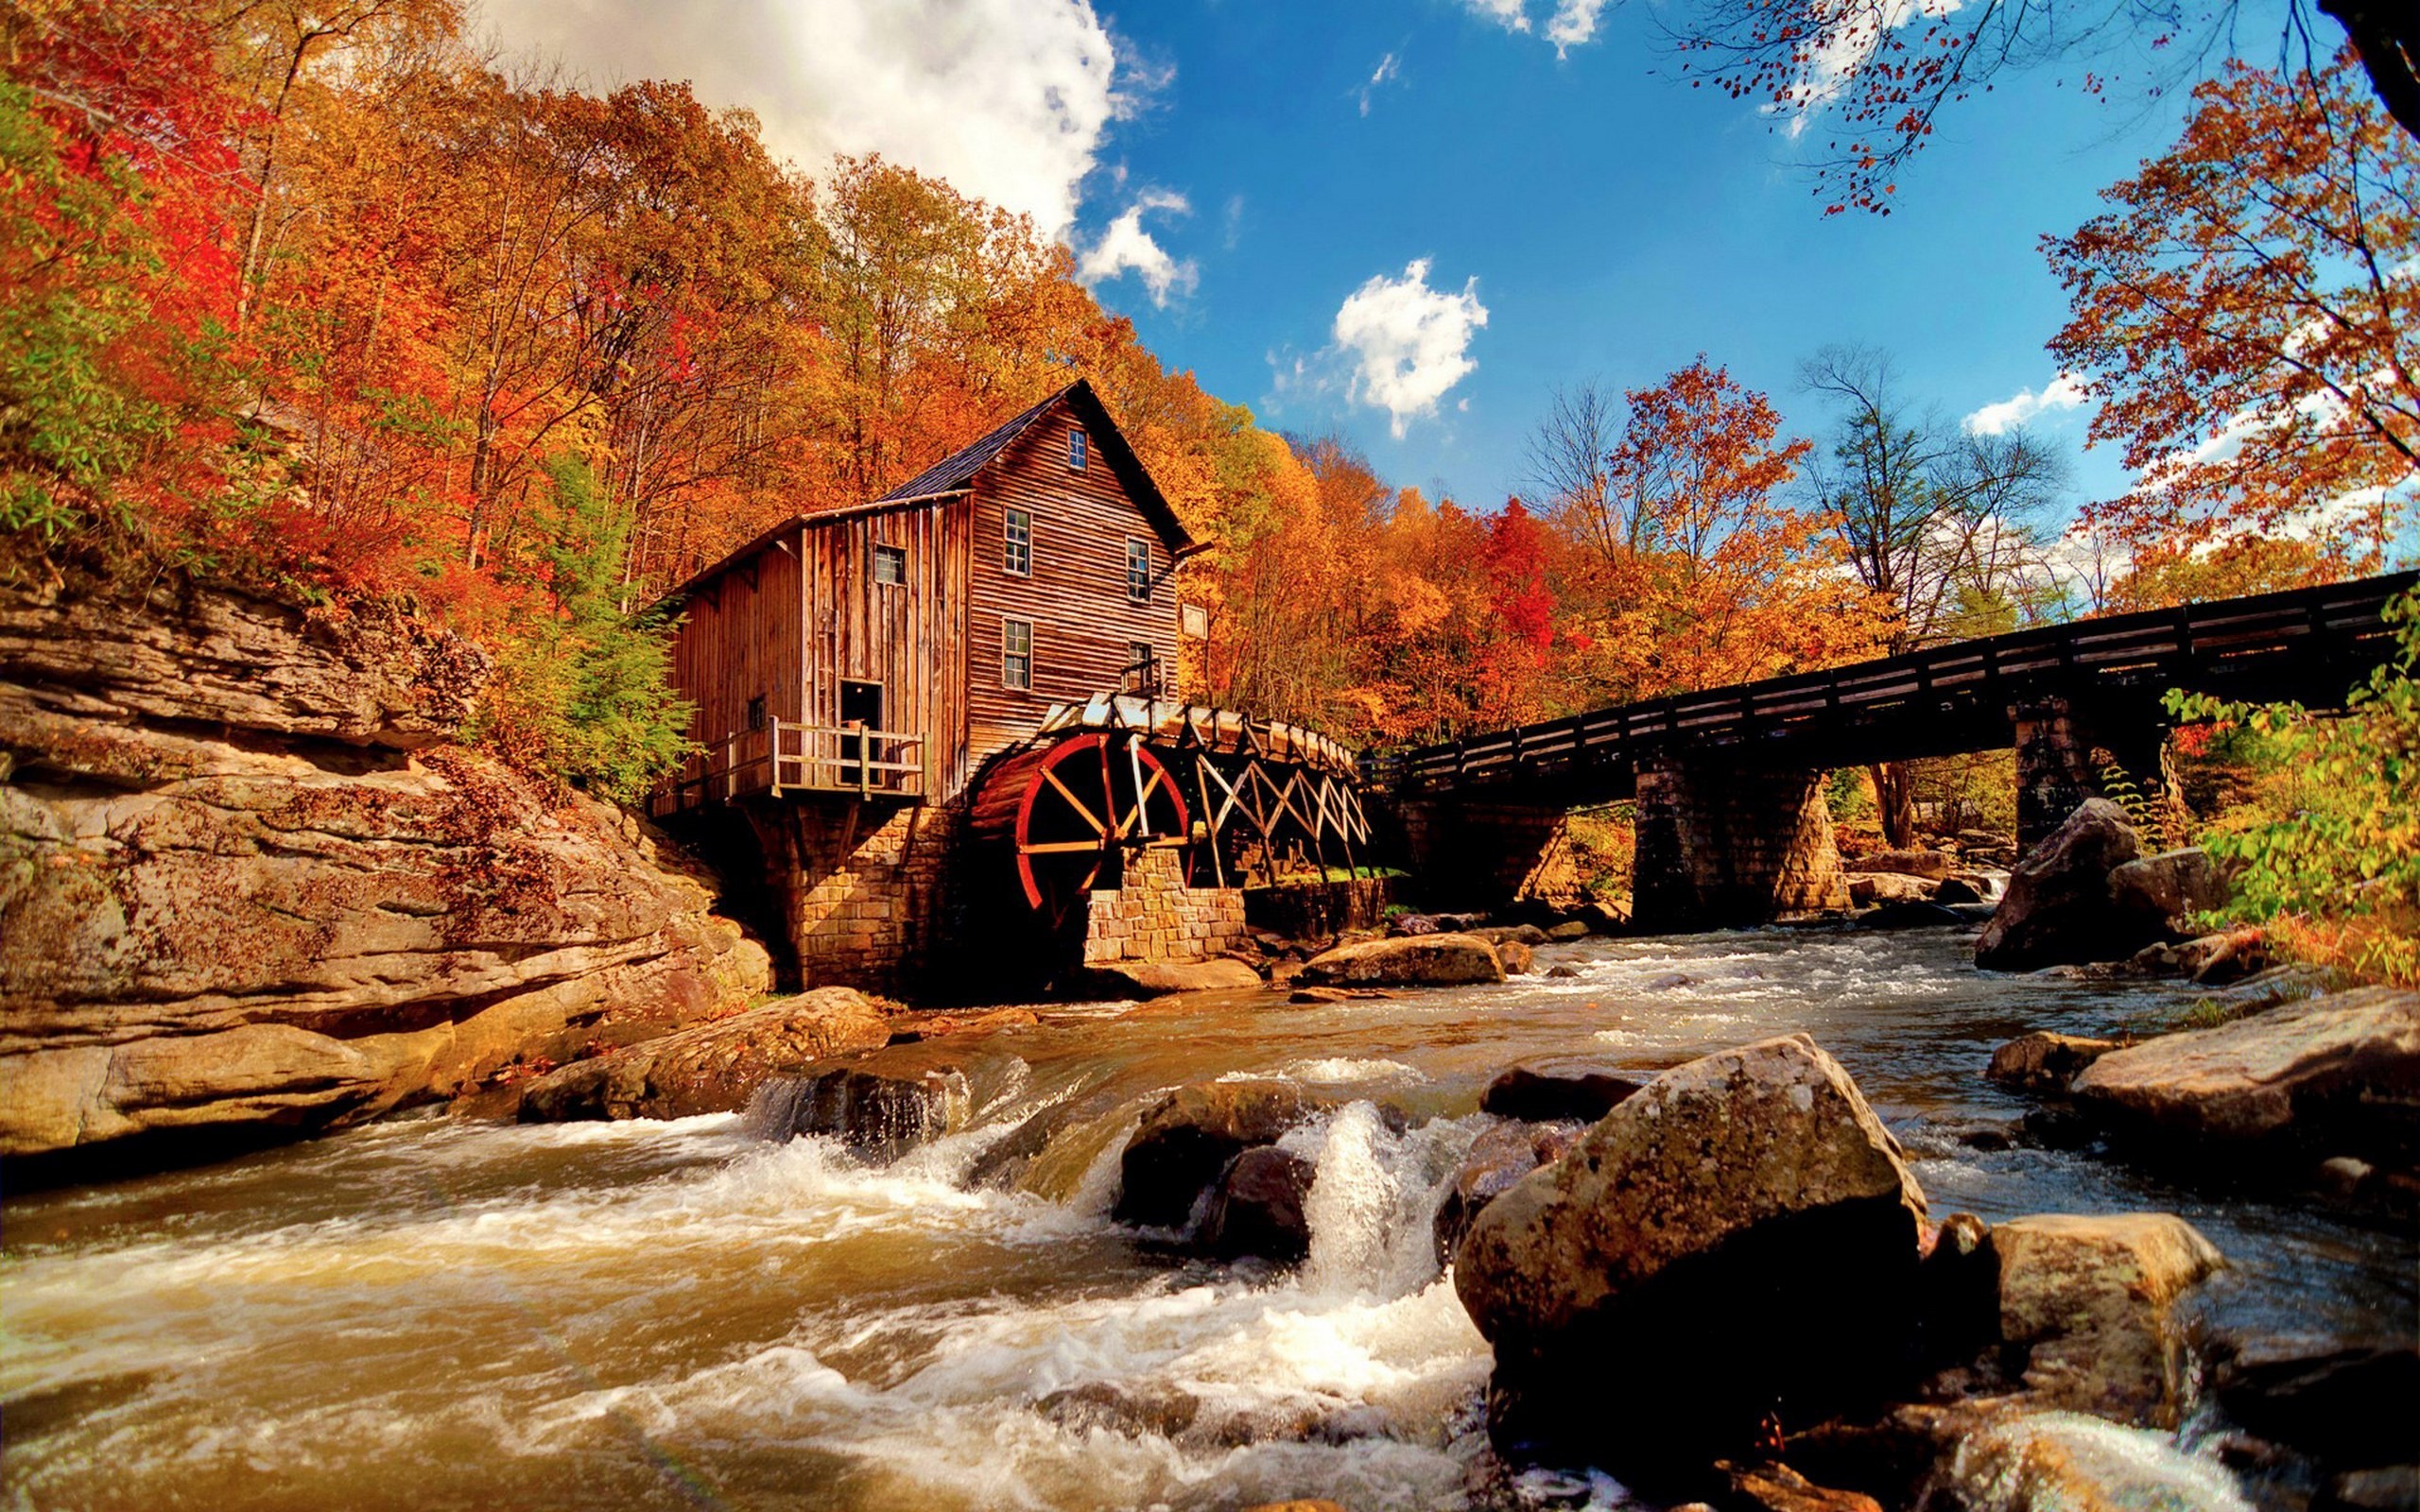 General 2560x1600 watermills river forest bridge fall wood house nature